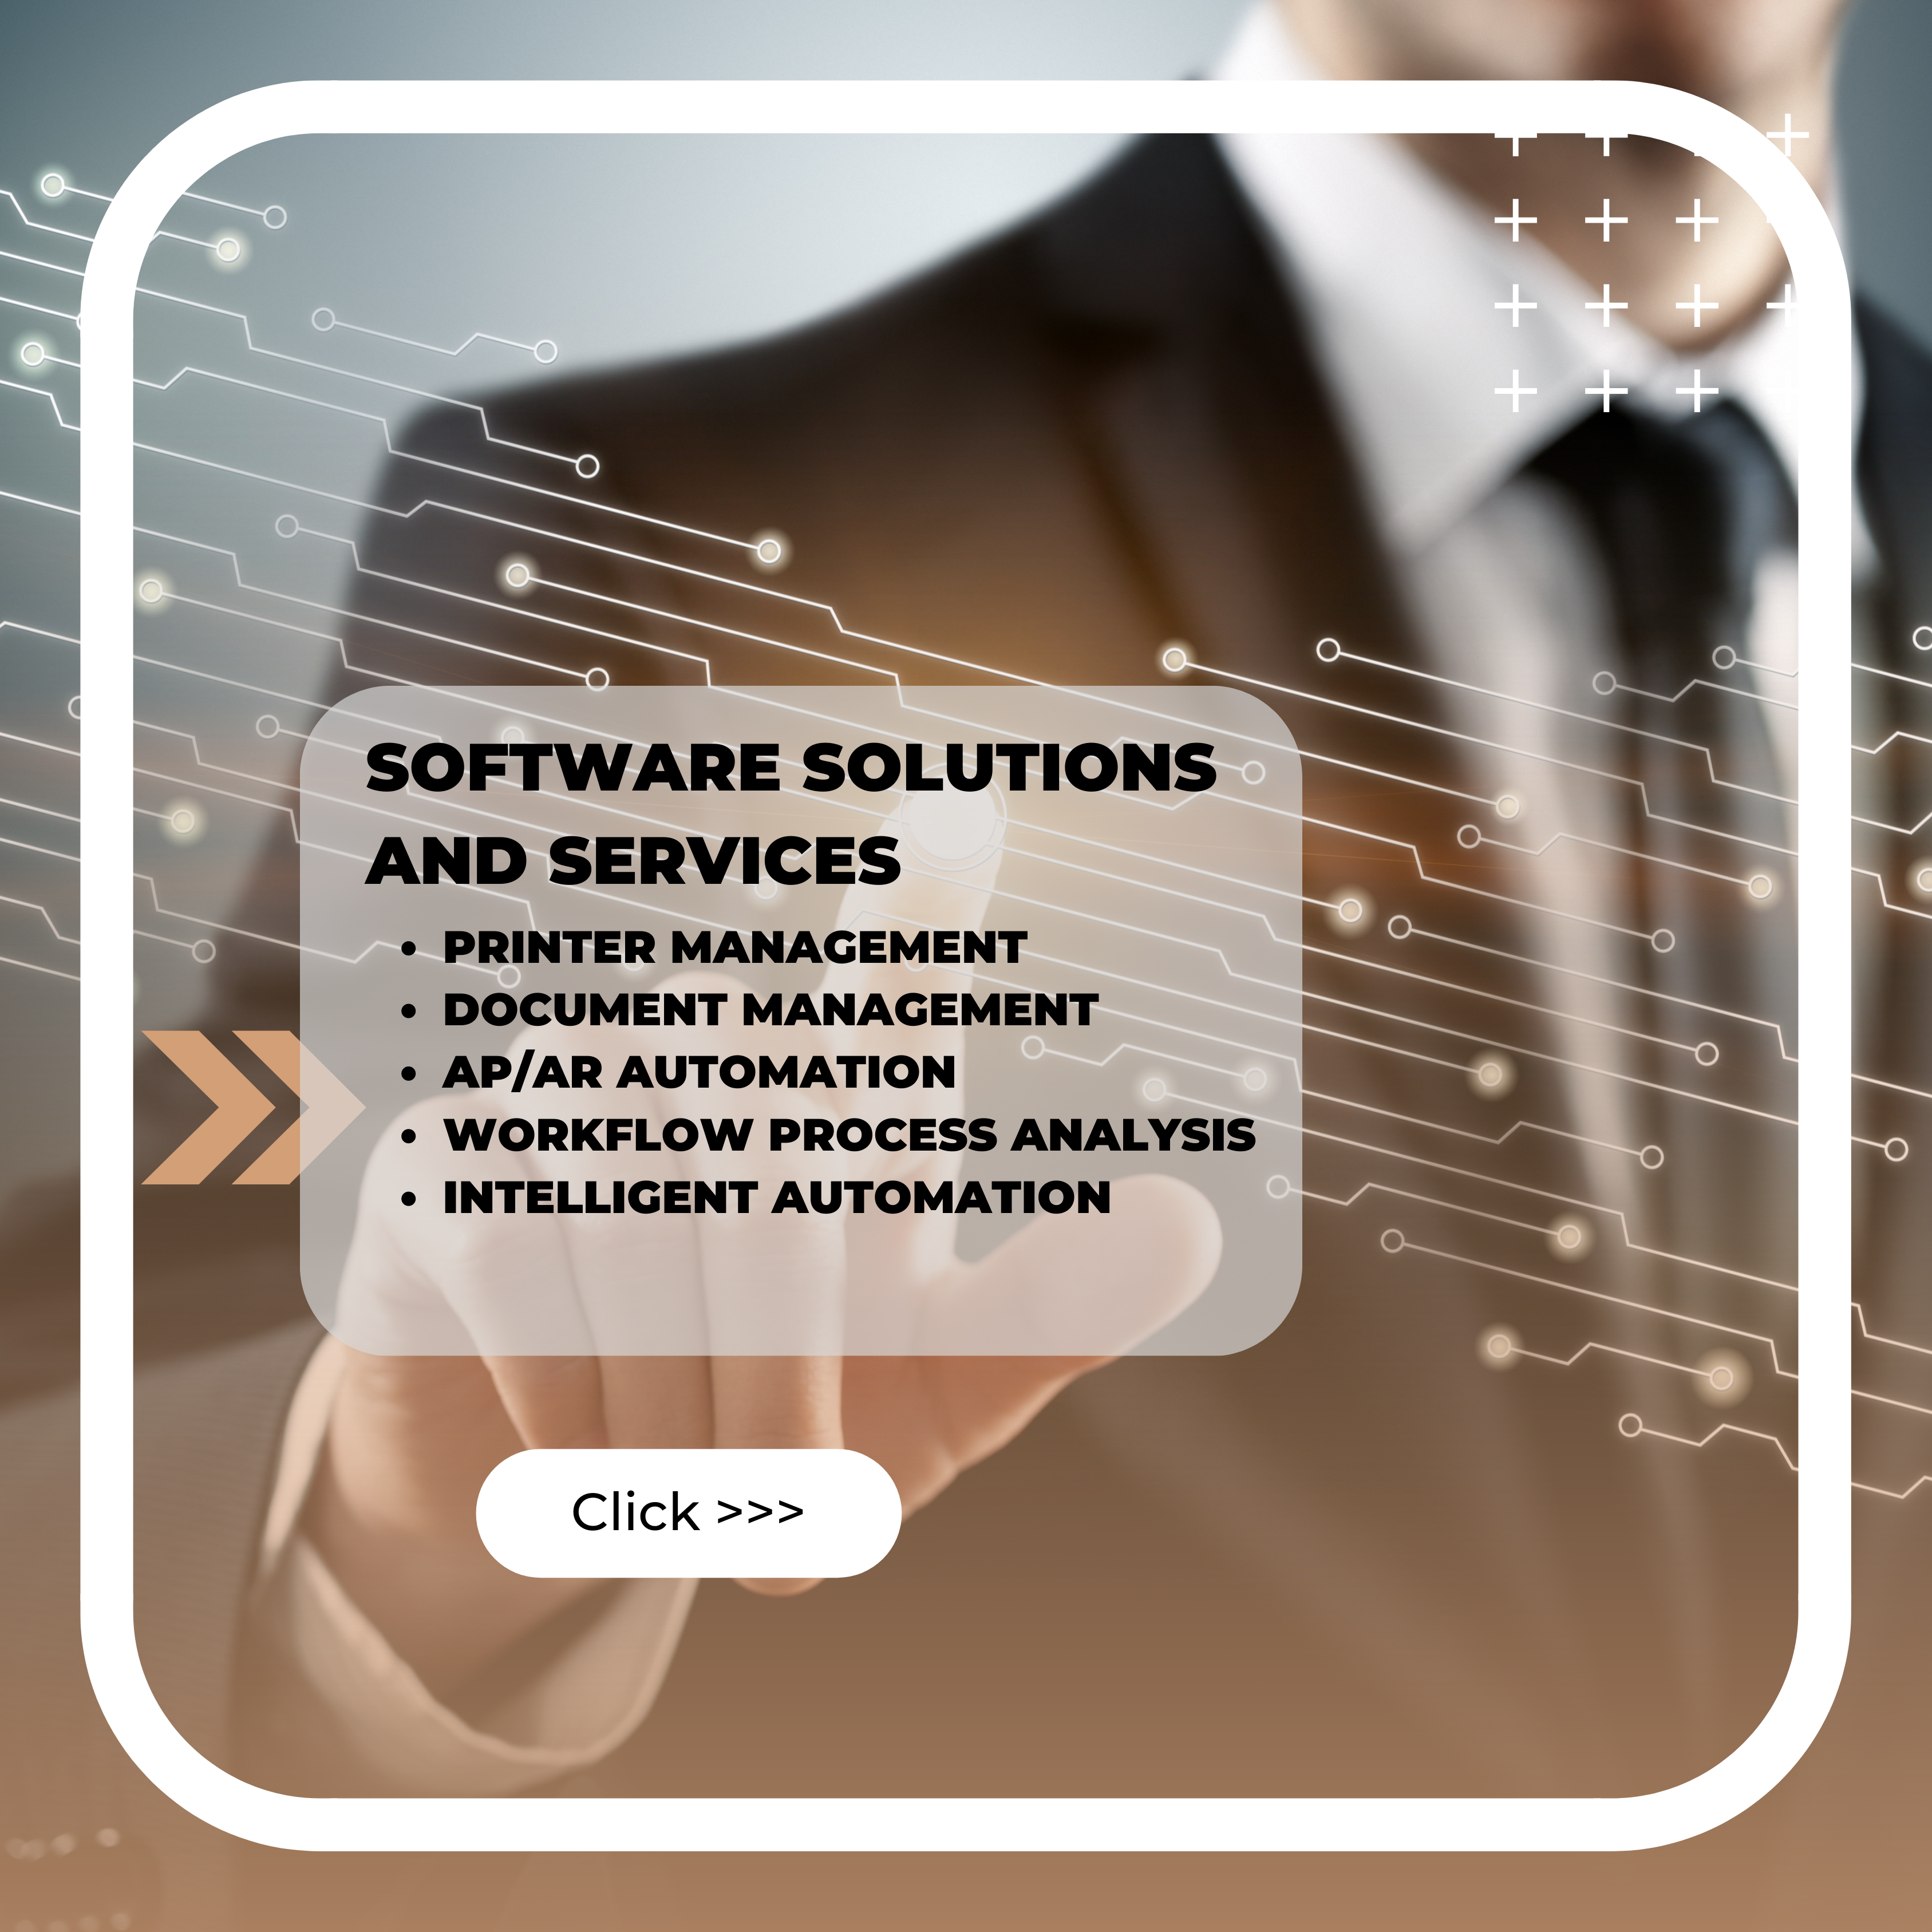 Office Print and Technology Software Solutions